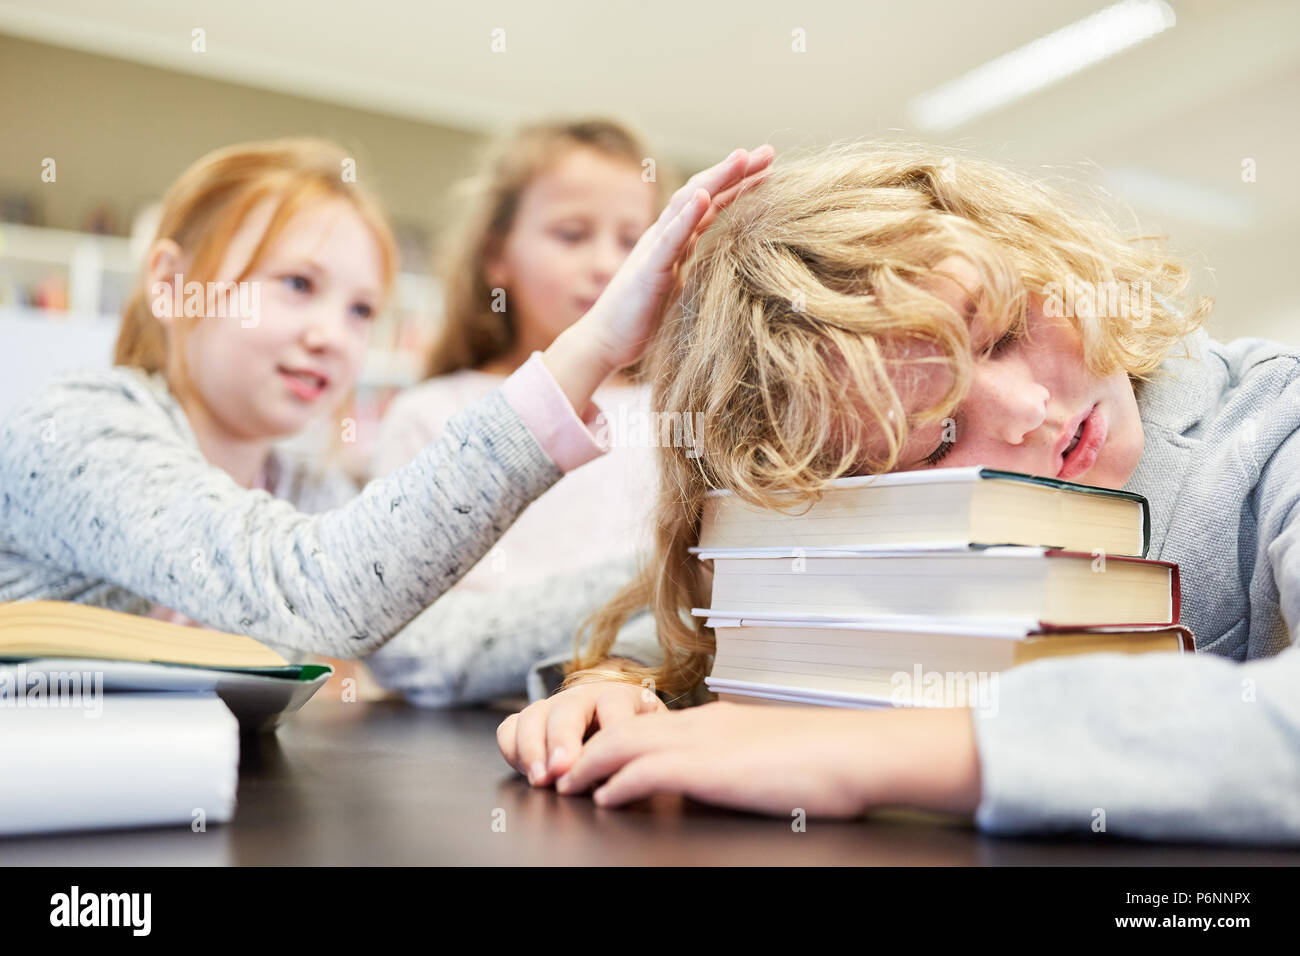 Boy as a student sleeps exhausted on his homework at school Stock Photo